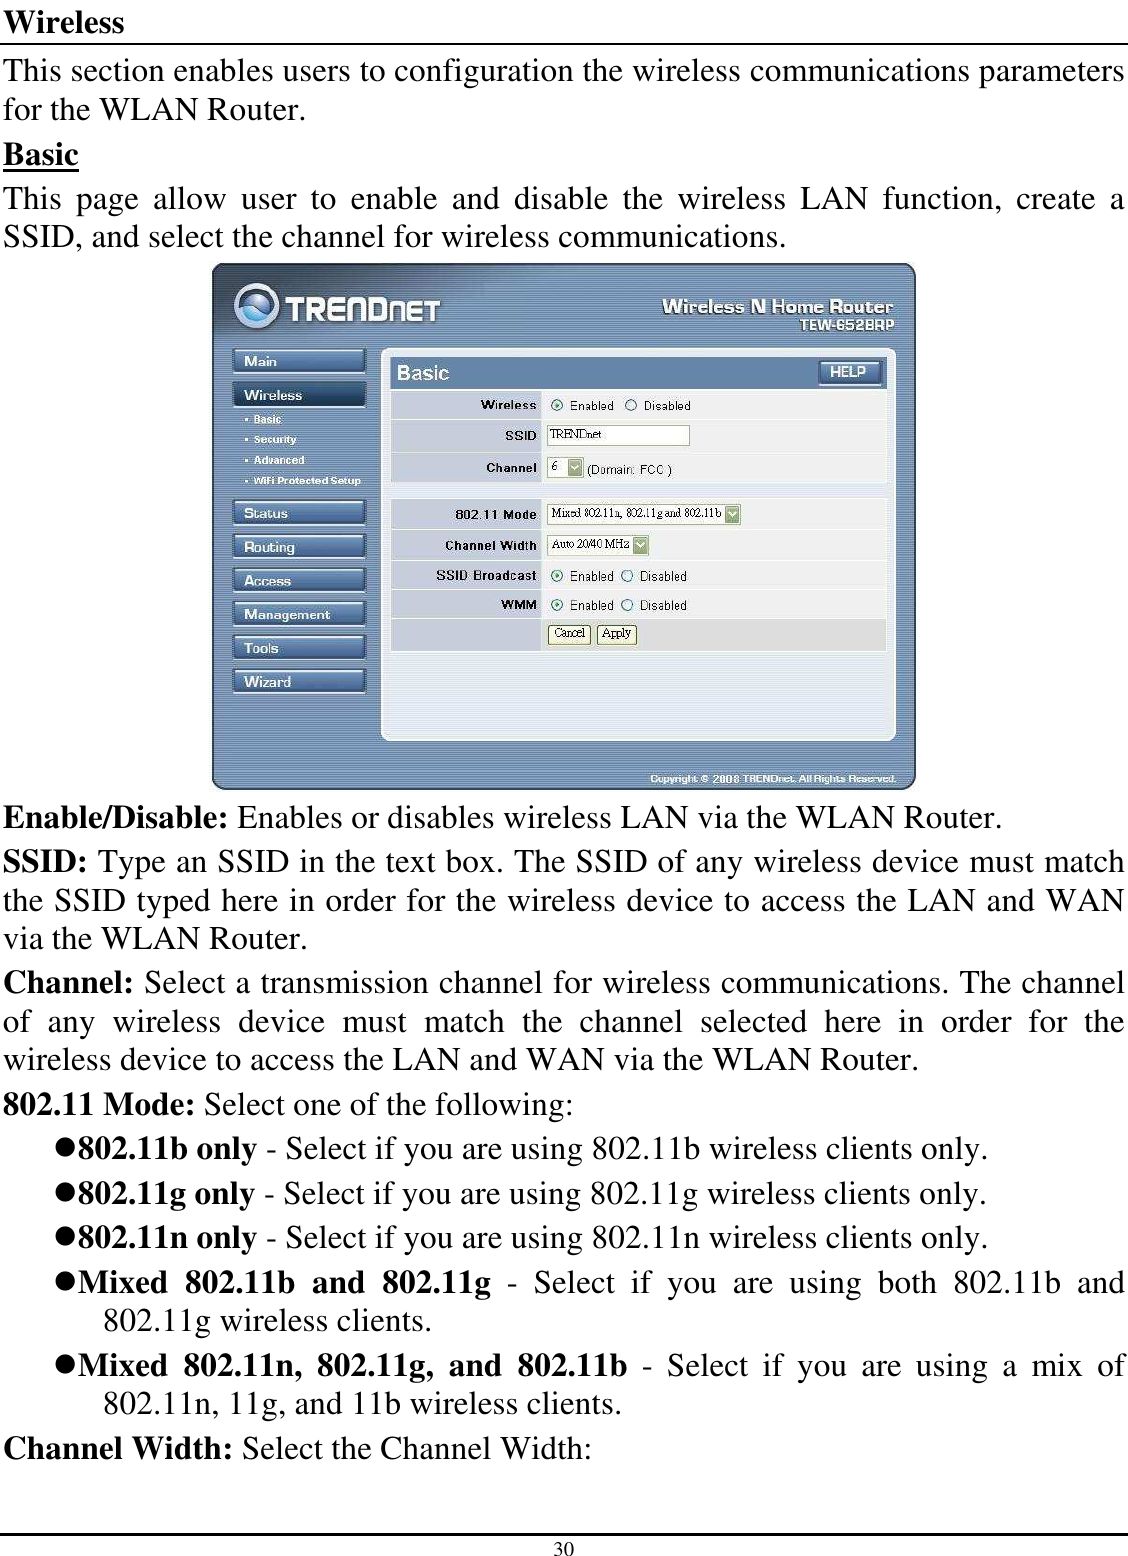 30 Wireless This section enables users to configuration the wireless communications parameters for the WLAN Router. Basic This  page  allow  user  to  enable  and  disable  the  wireless  LAN  function,  create  a SSID, and select the channel for wireless communications.  Enable/Disable: Enables or disables wireless LAN via the WLAN Router. SSID: Type an SSID in the text box. The SSID of any wireless device must match the SSID typed here in order for the wireless device to access the LAN and WAN via the WLAN Router. Channel: Select a transmission channel for wireless communications. The channel of  any  wireless  device  must  match  the  channel  selected  here  in  order  for  the wireless device to access the LAN and WAN via the WLAN Router. 802.11 Mode: Select one of the following: 802.11b only - Select if you are using 802.11b wireless clients only. 802.11g only - Select if you are using 802.11g wireless clients only. 802.11n only - Select if you are using 802.11n wireless clients only. Mixed  802.11b  and  802.11g  -  Select  if  you  are  using  both  802.11b  and 802.11g wireless clients. Mixed  802.11n,  802.11g,  and  802.11b  -  Select  if  you  are  using  a  mix  of 802.11n, 11g, and 11b wireless clients. Channel Width: Select the Channel Width: 